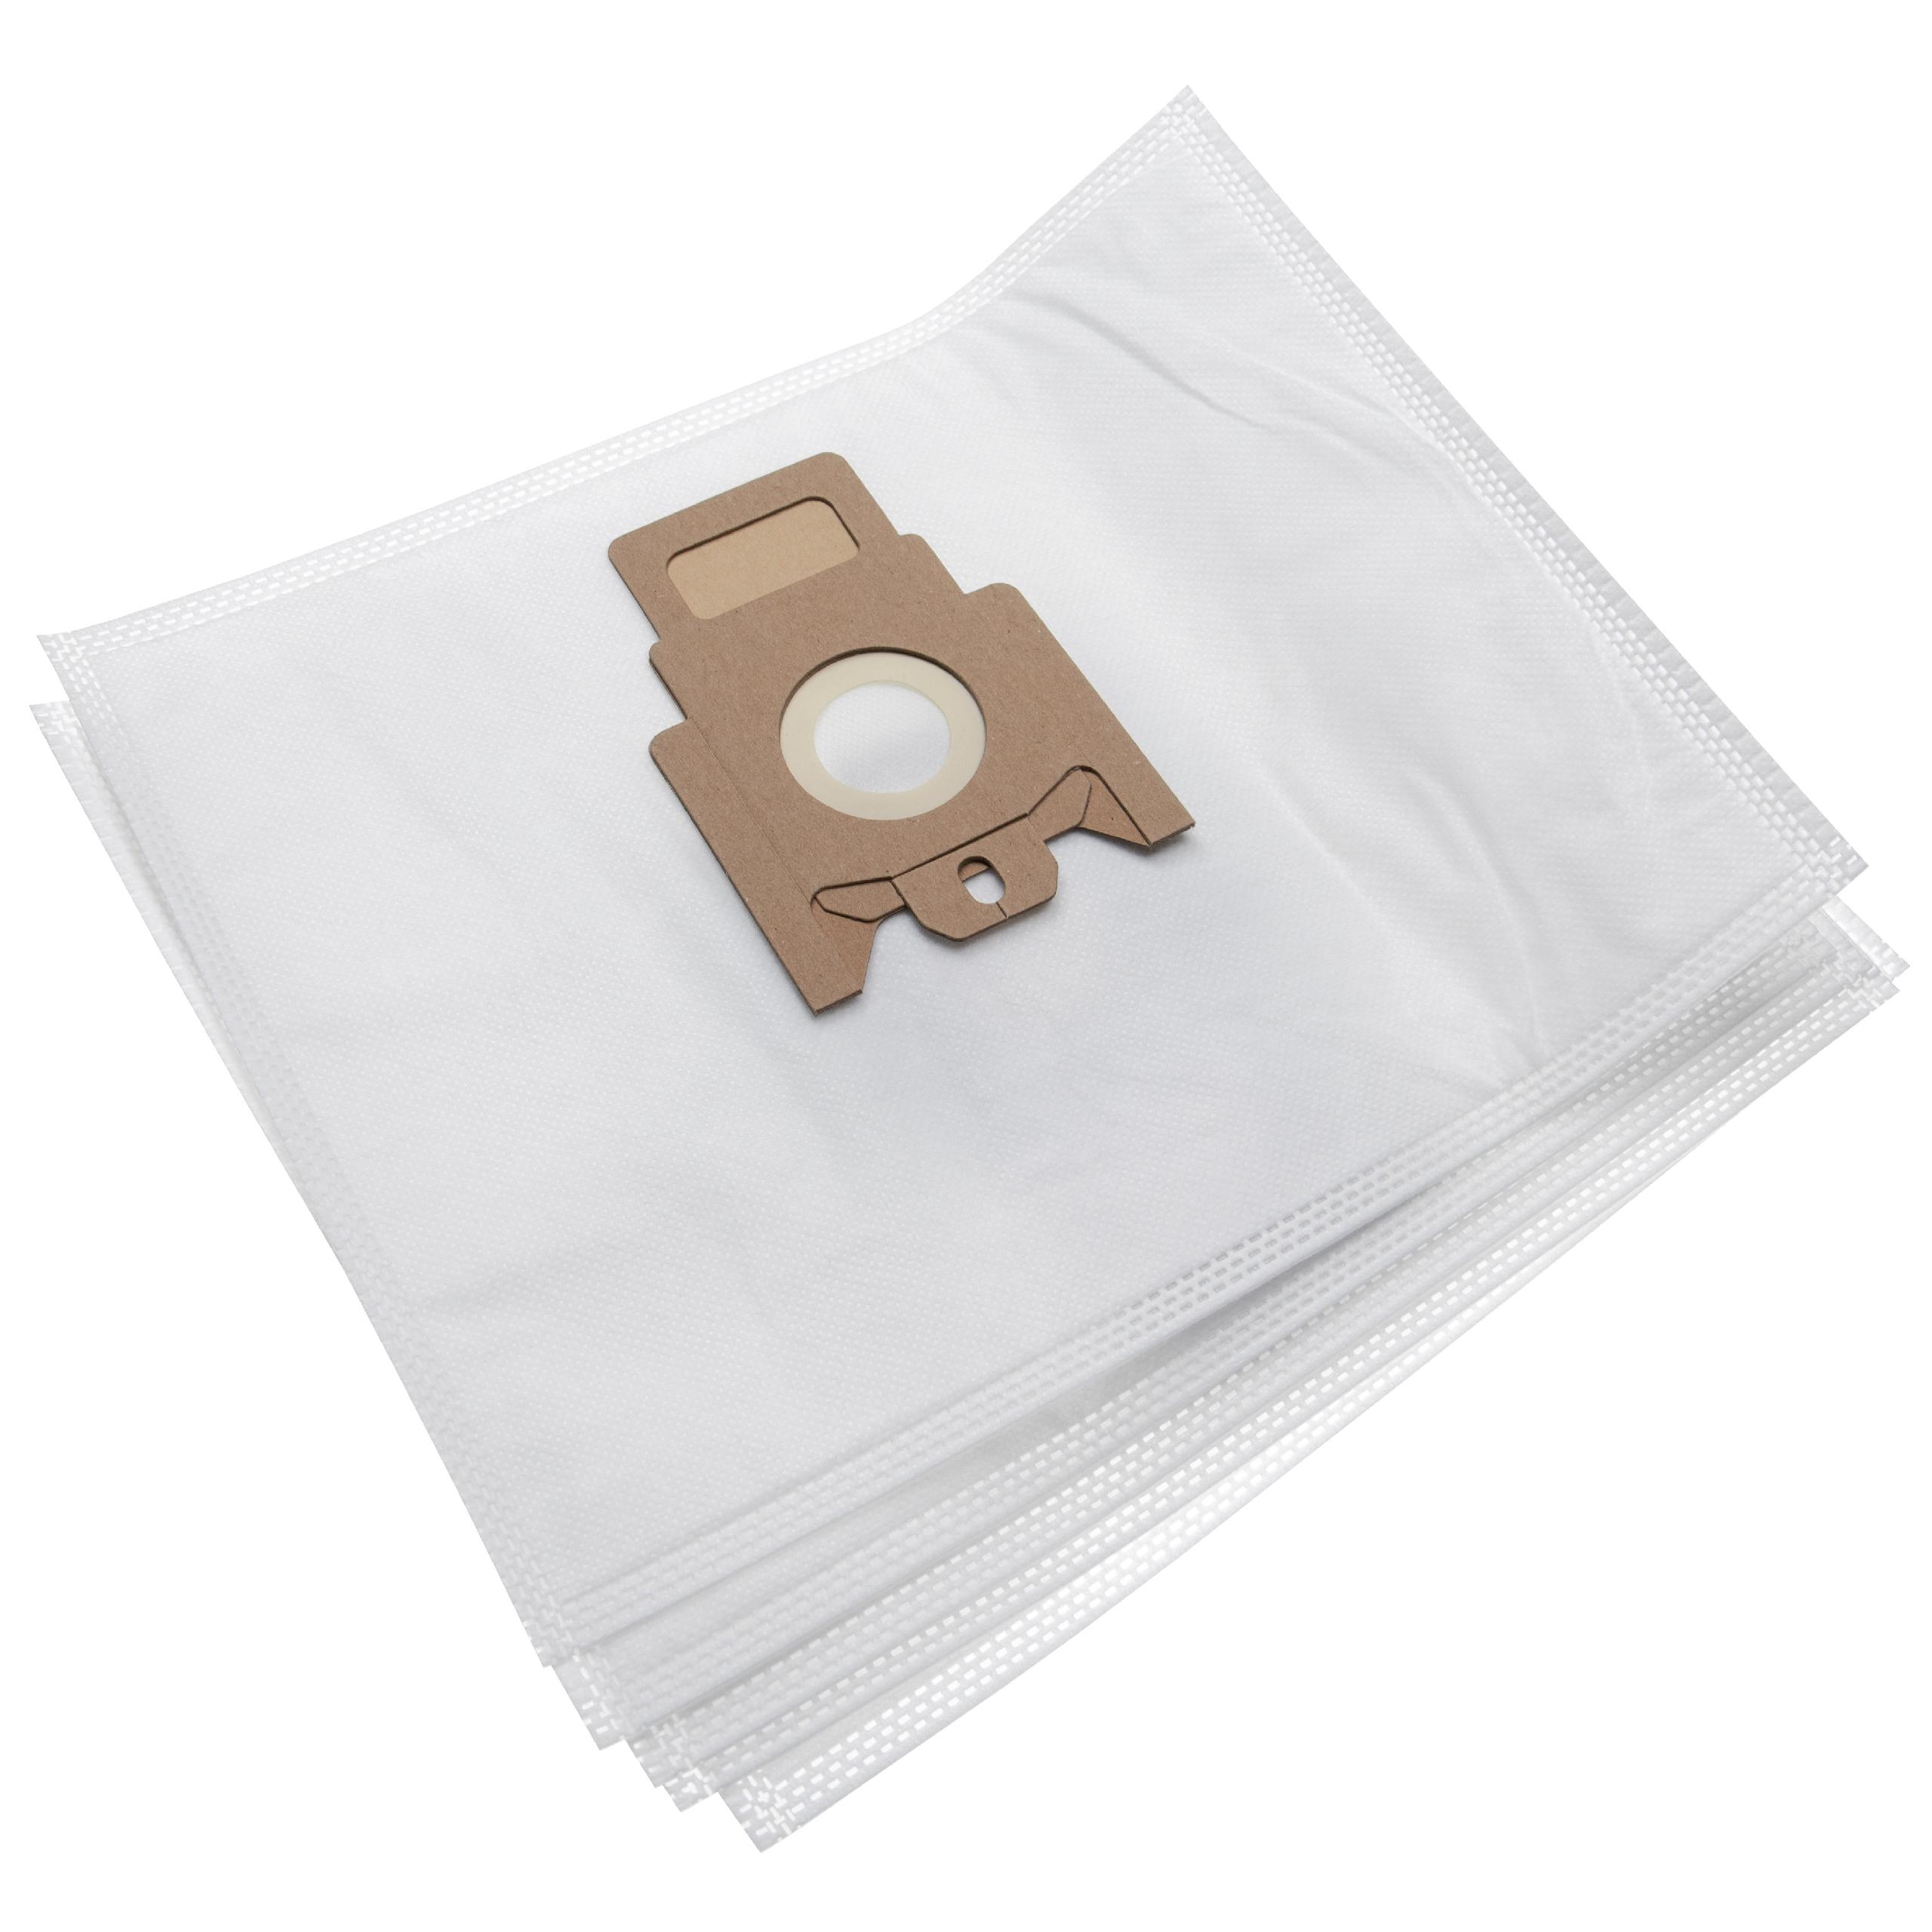 5x Vacuum Cleaner Bag replaces Hoover 35600392, H60 for Hoover - microfleece